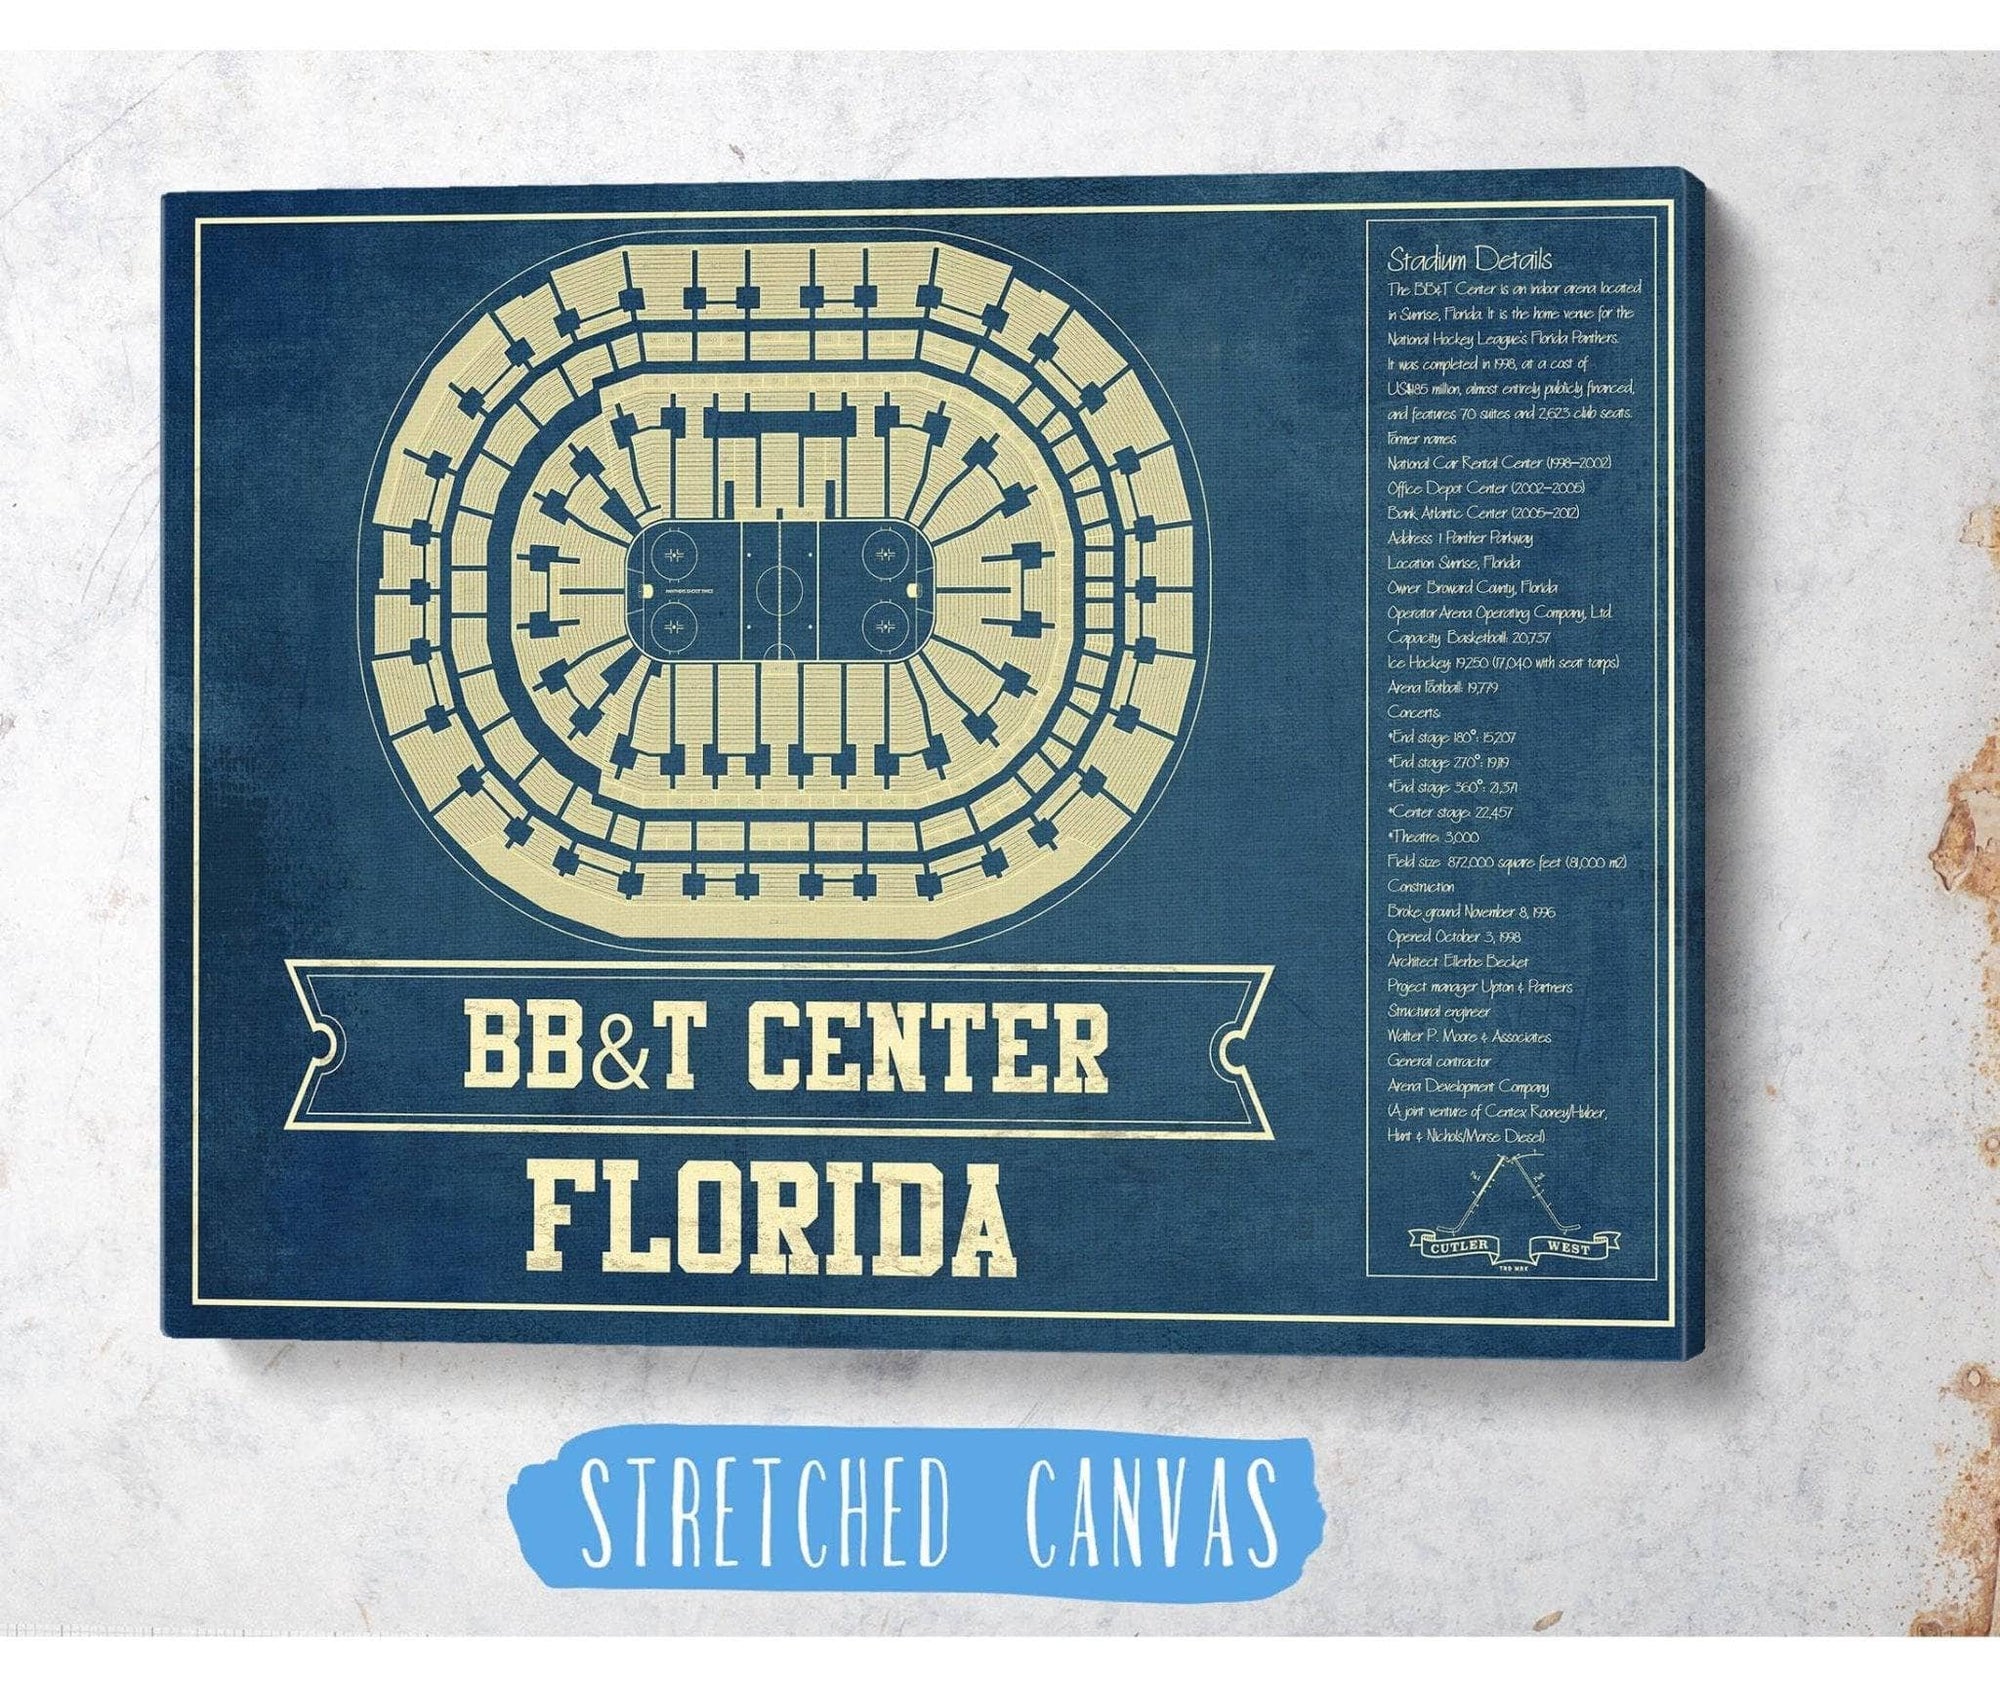 Cutler West Florida Panthers BB&T Center Seating Chart - Vintage Hockey Print